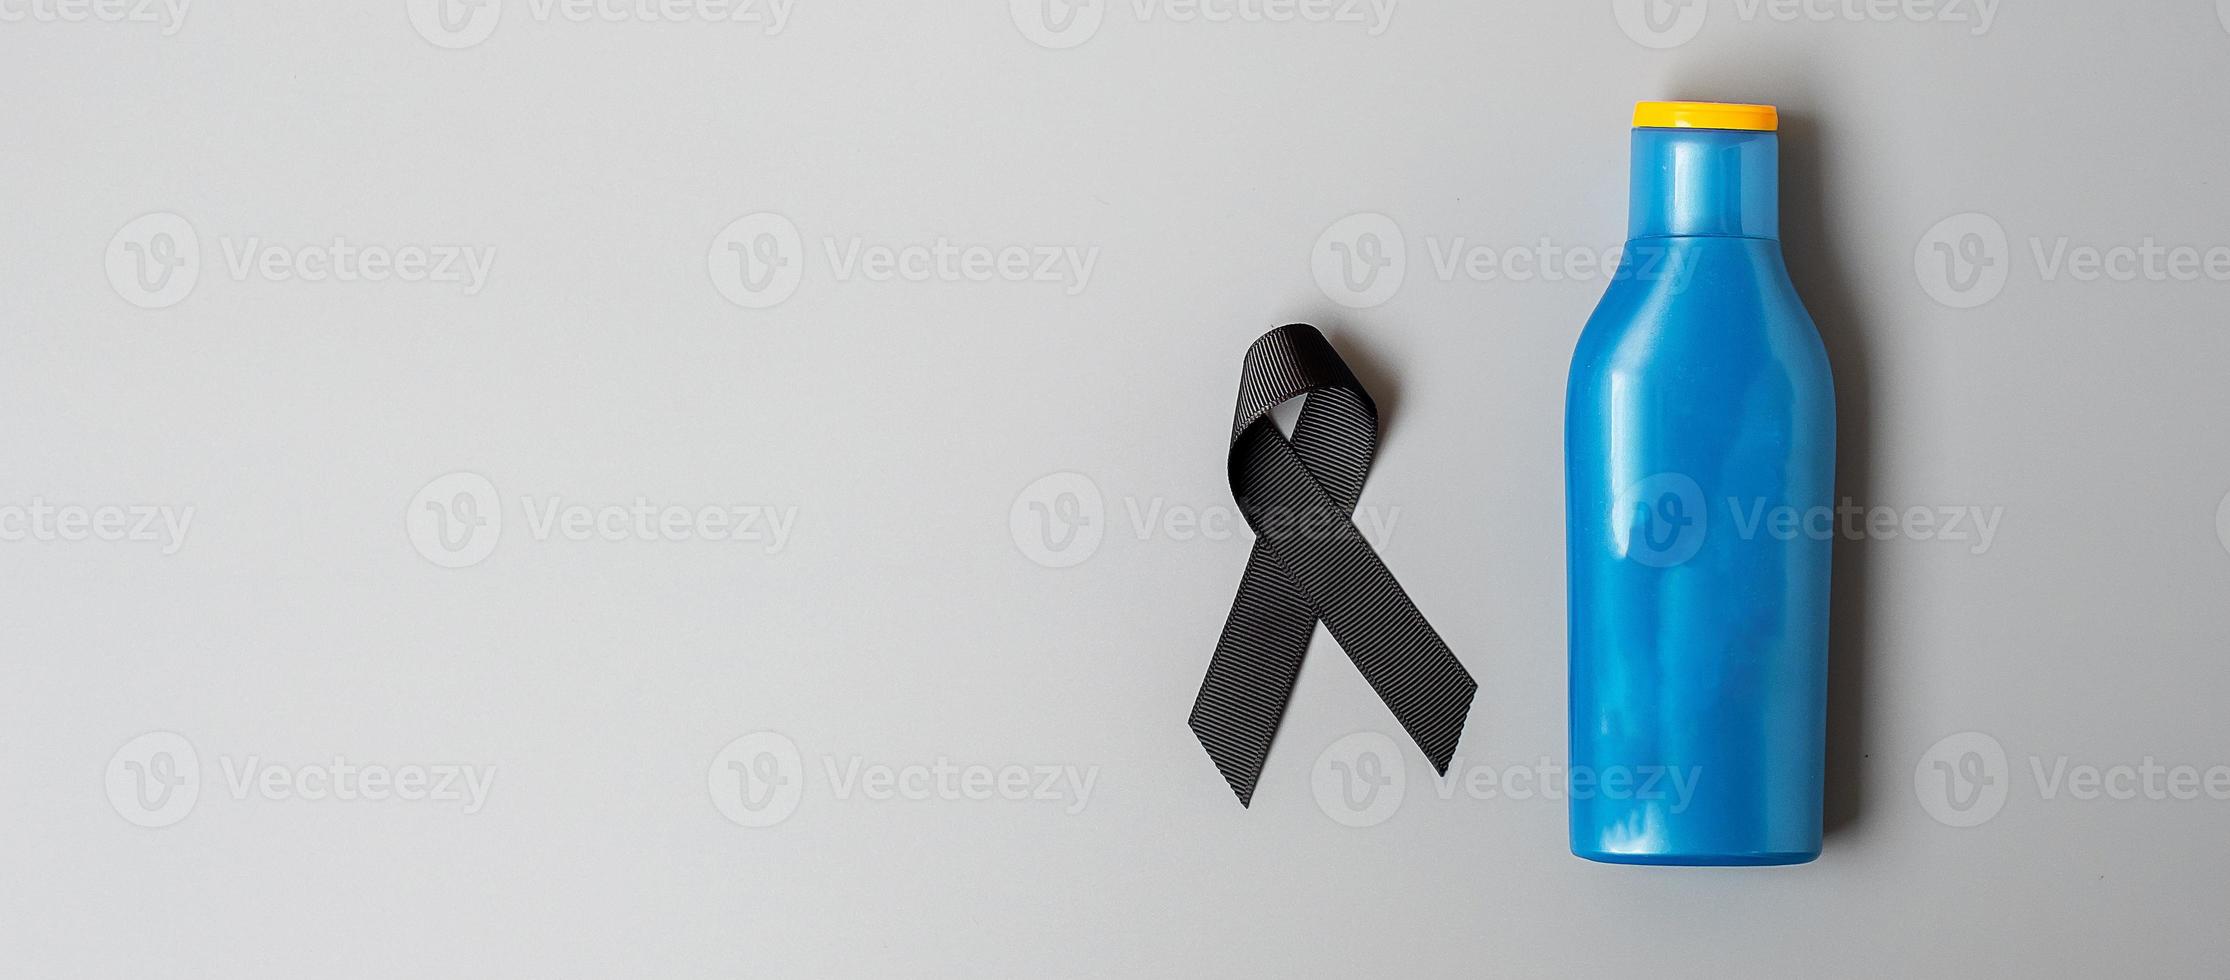 Melanoma and skin cancer awareness month. black Ribbon and body sunscreen bottle on grey background. World cancer day concept photo